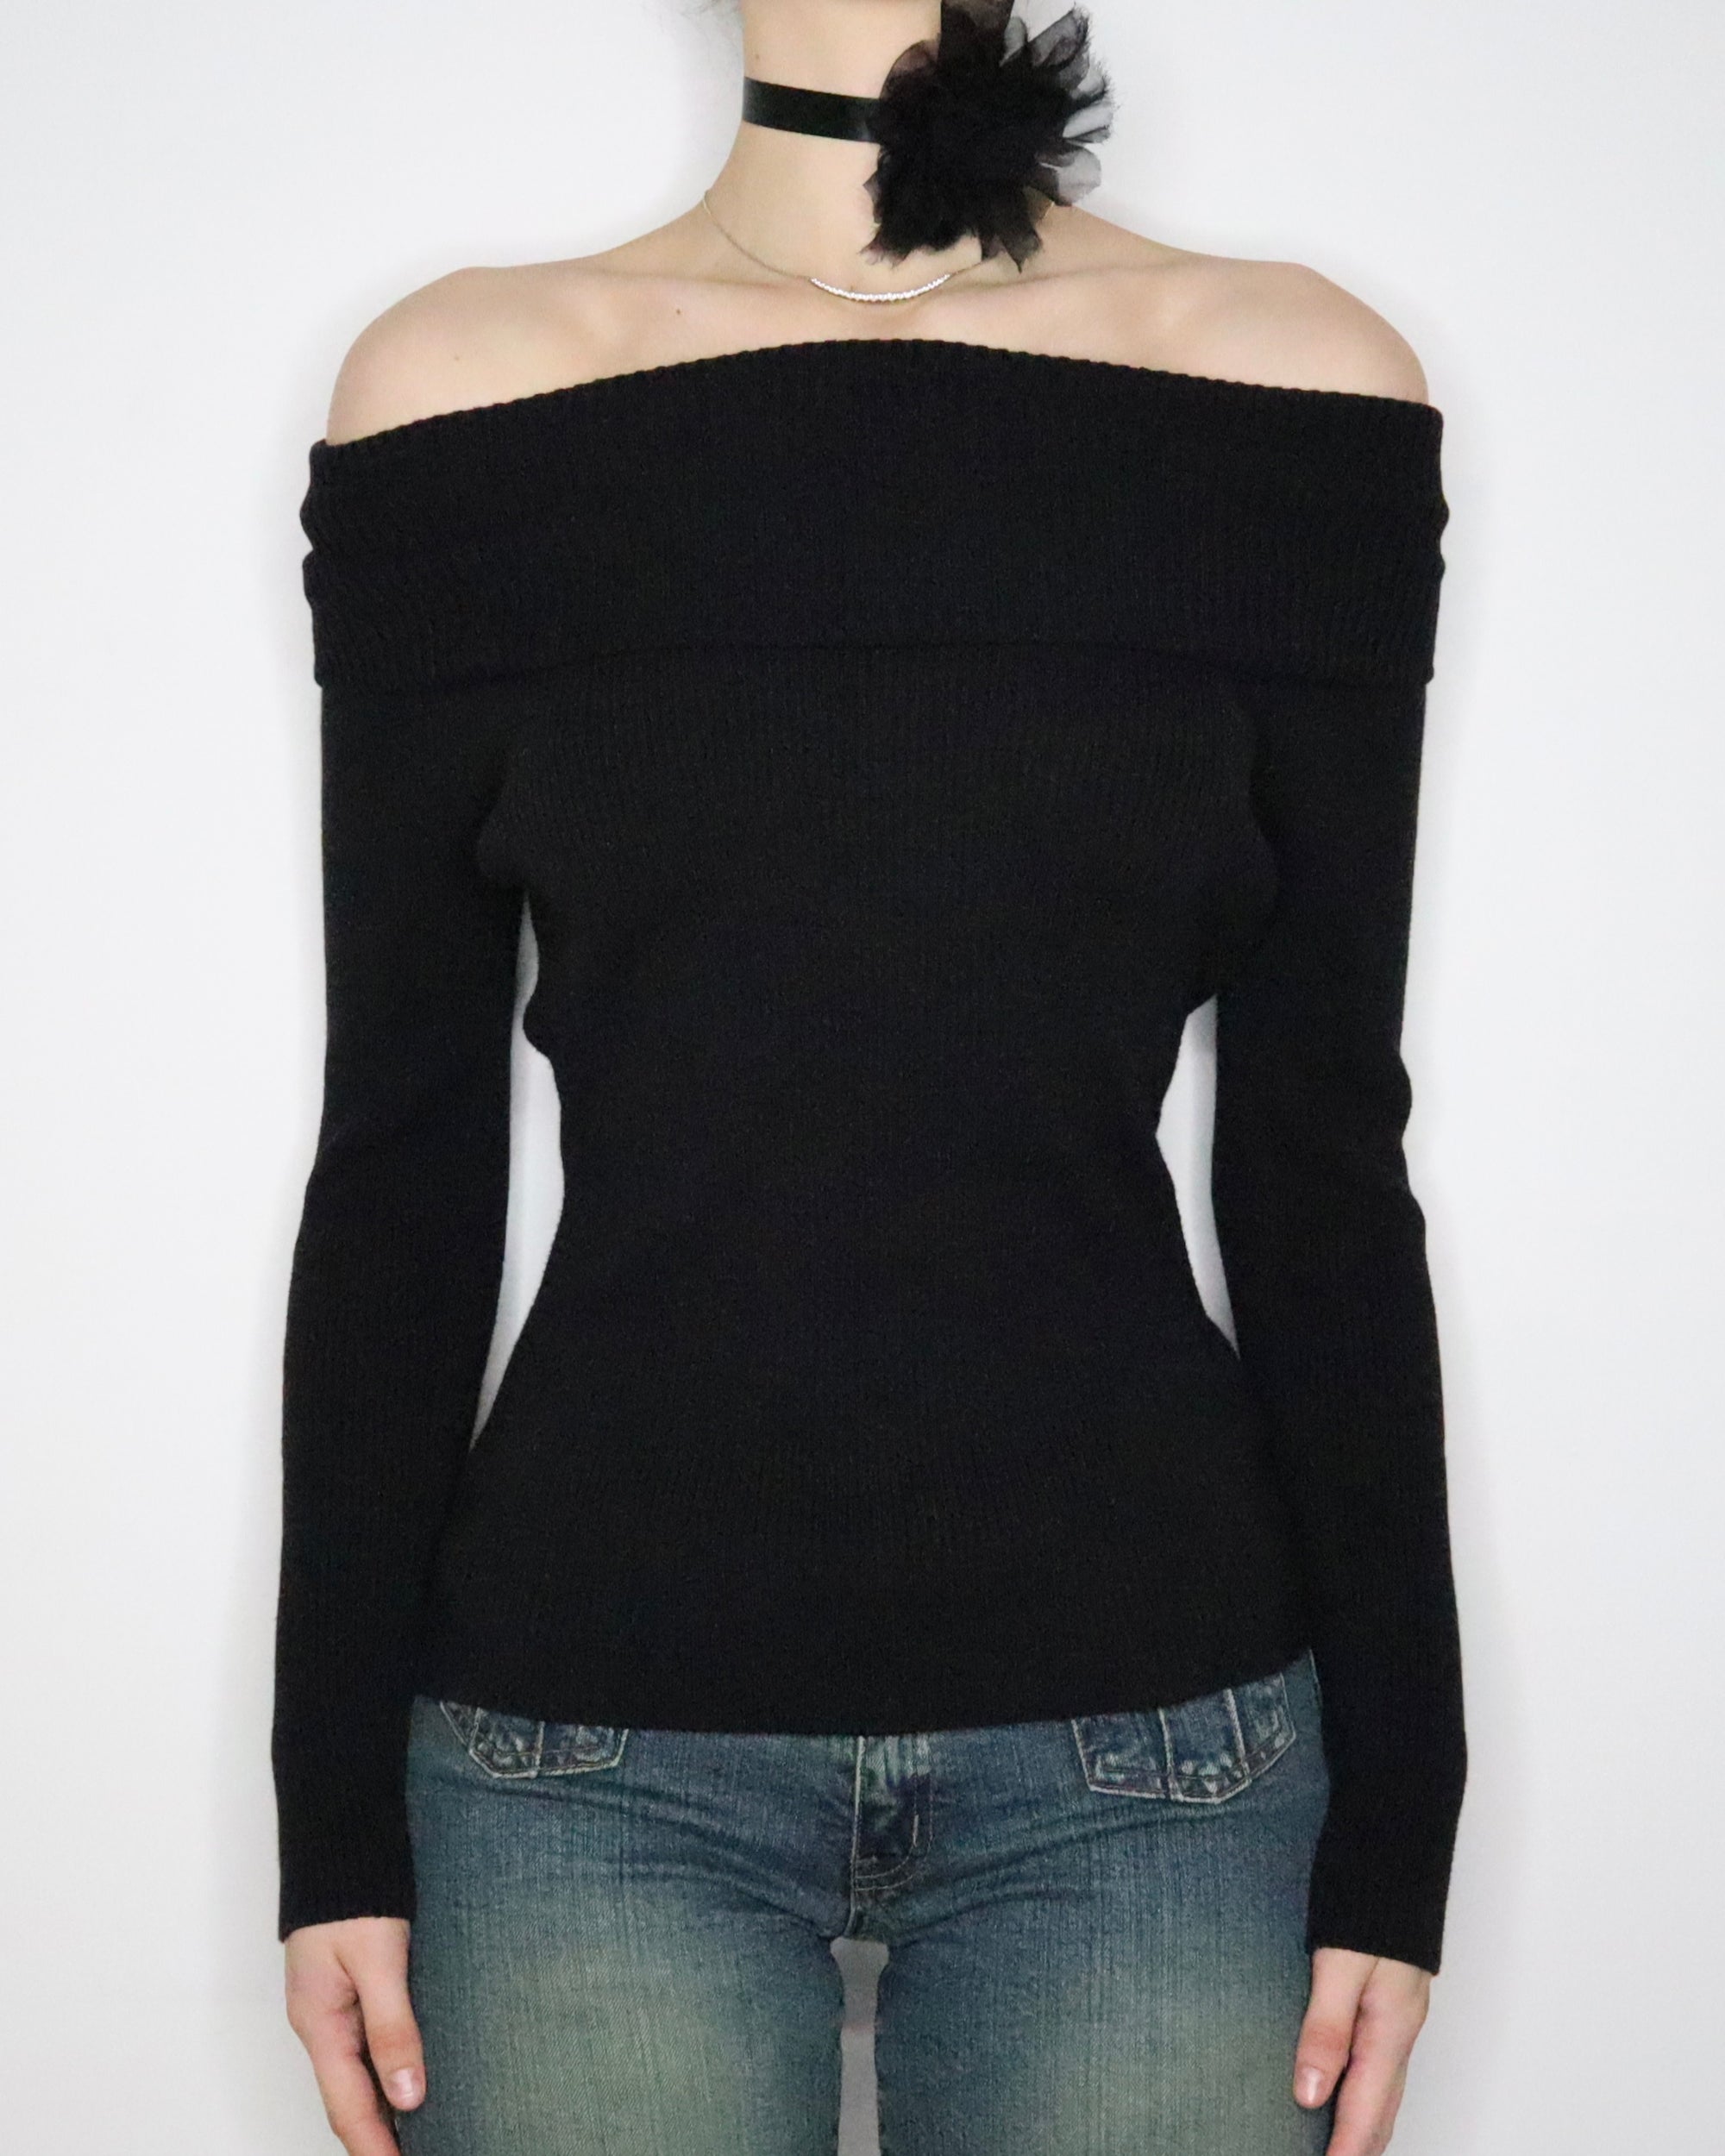 Black Off the Shoulder Sweater (XS-S) 